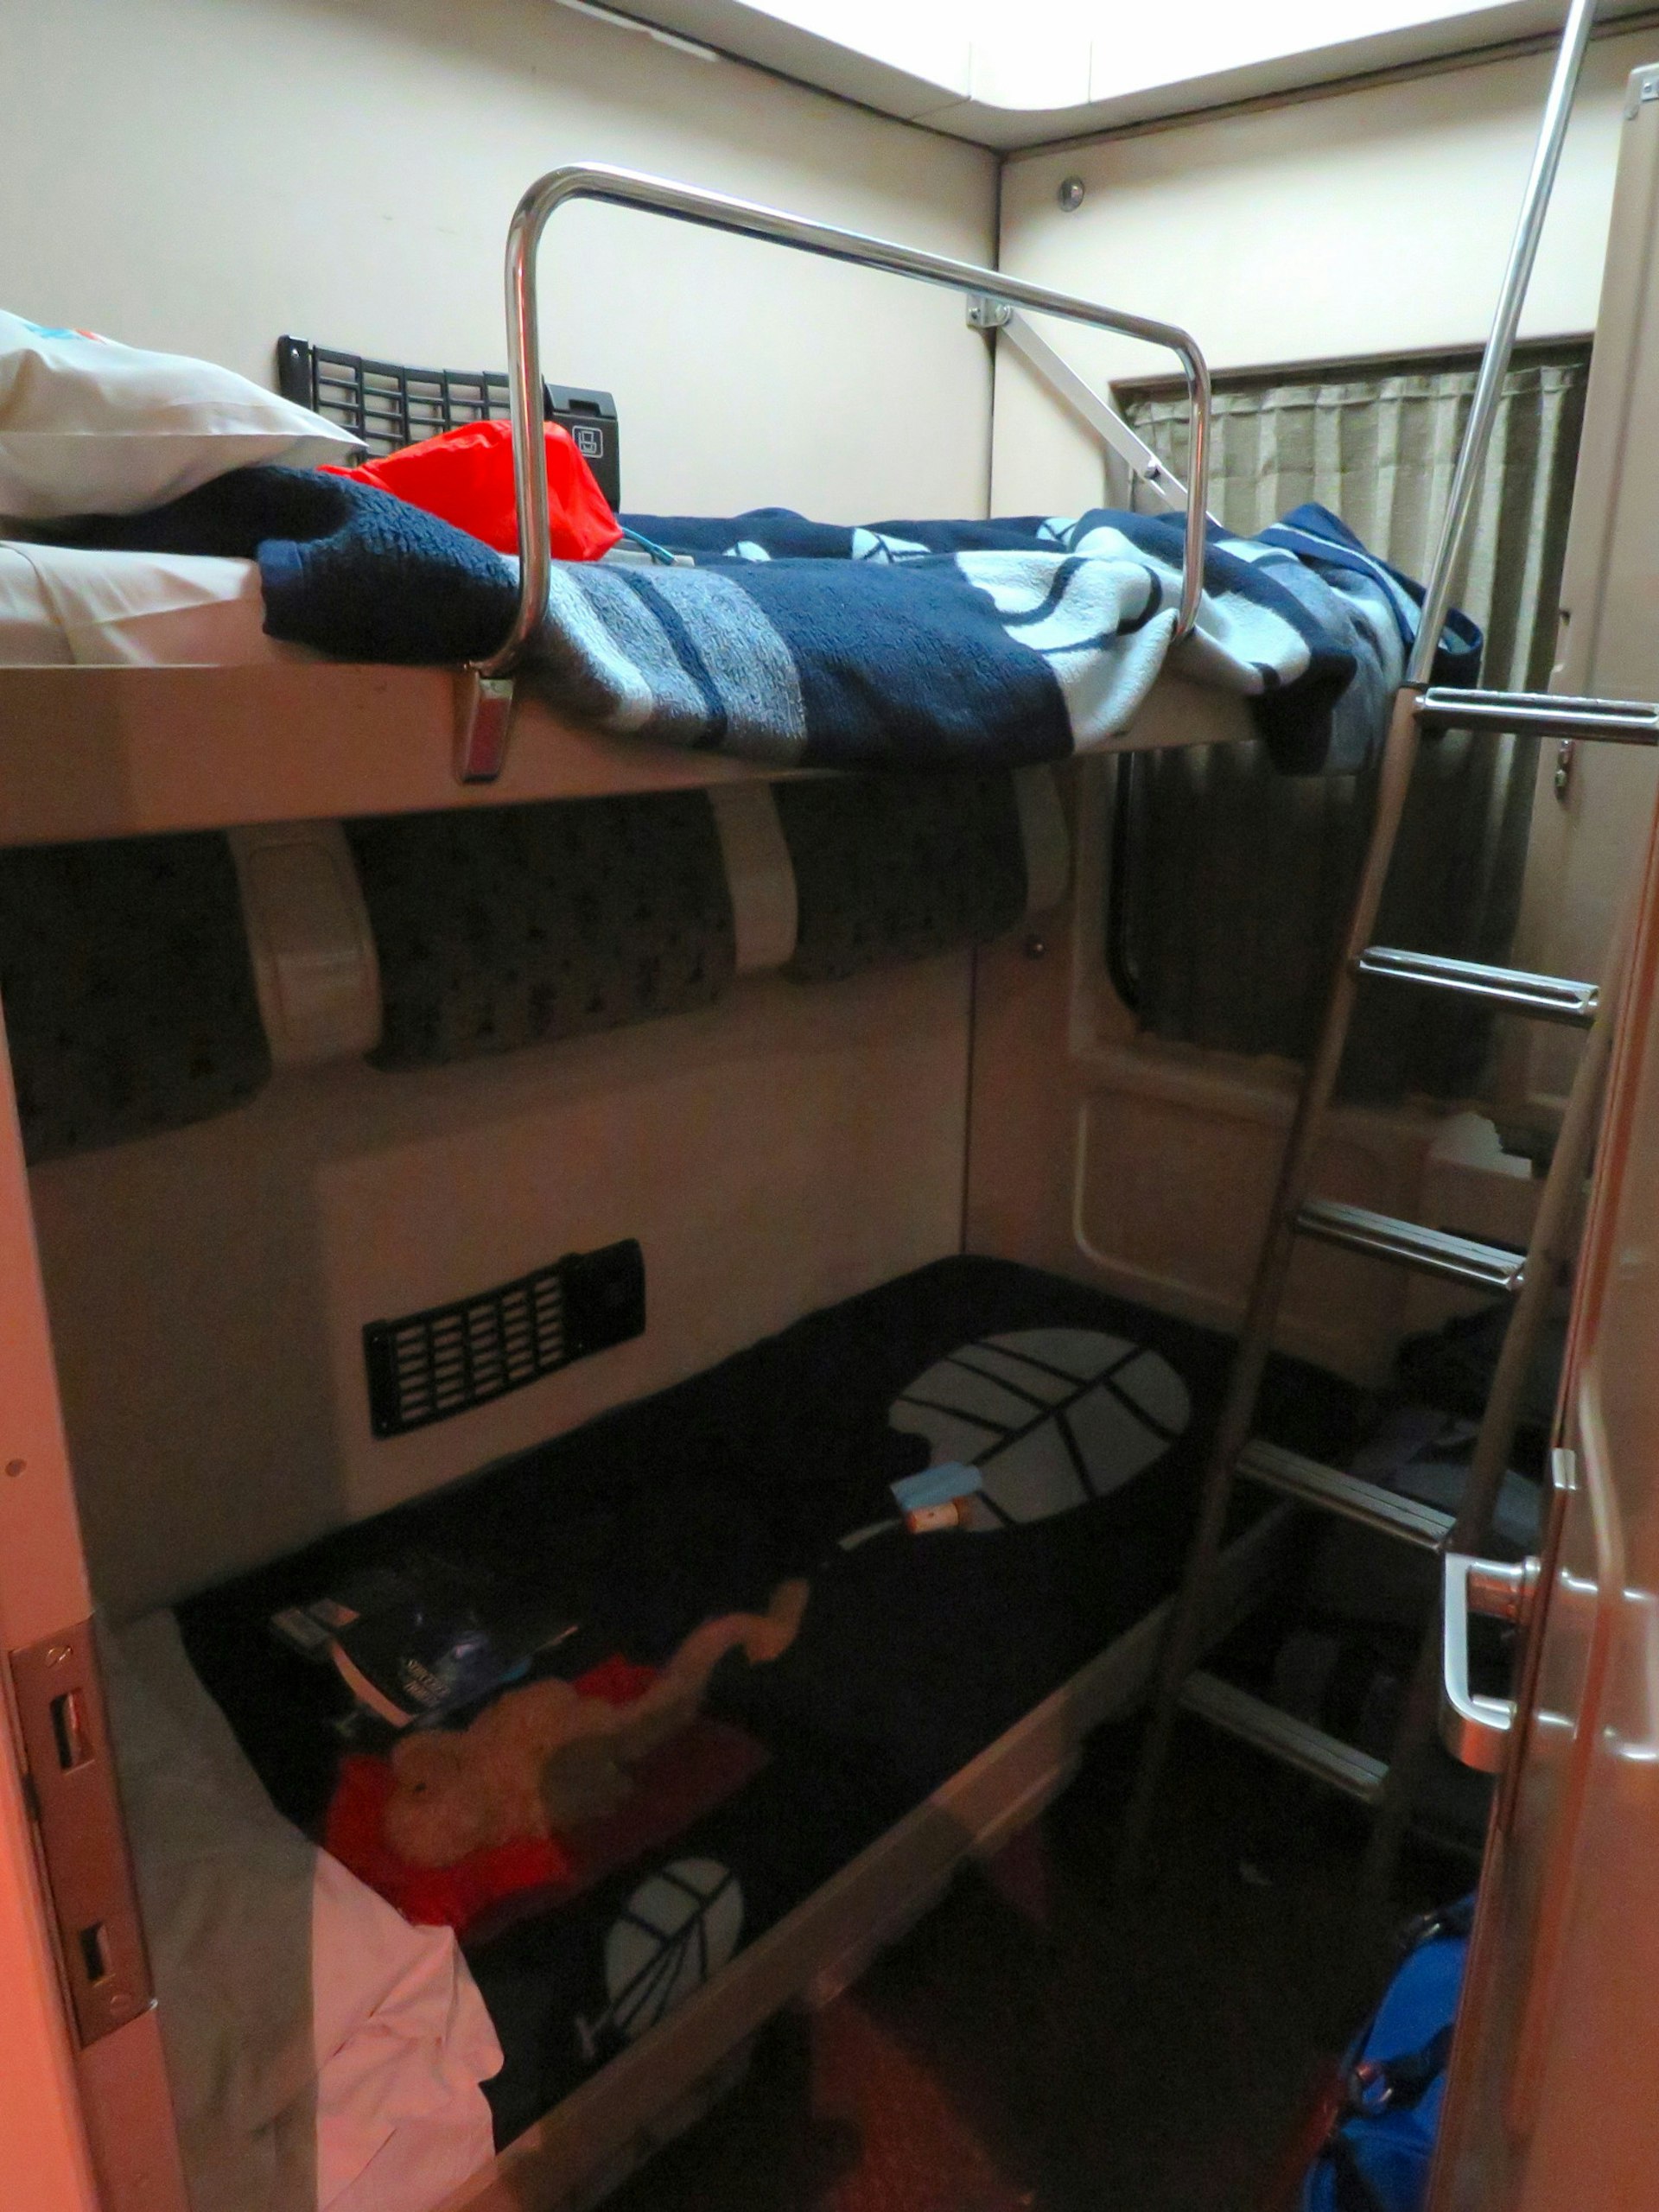 Two bunks in a small compartment on a train with a stainless steel ladder at the end